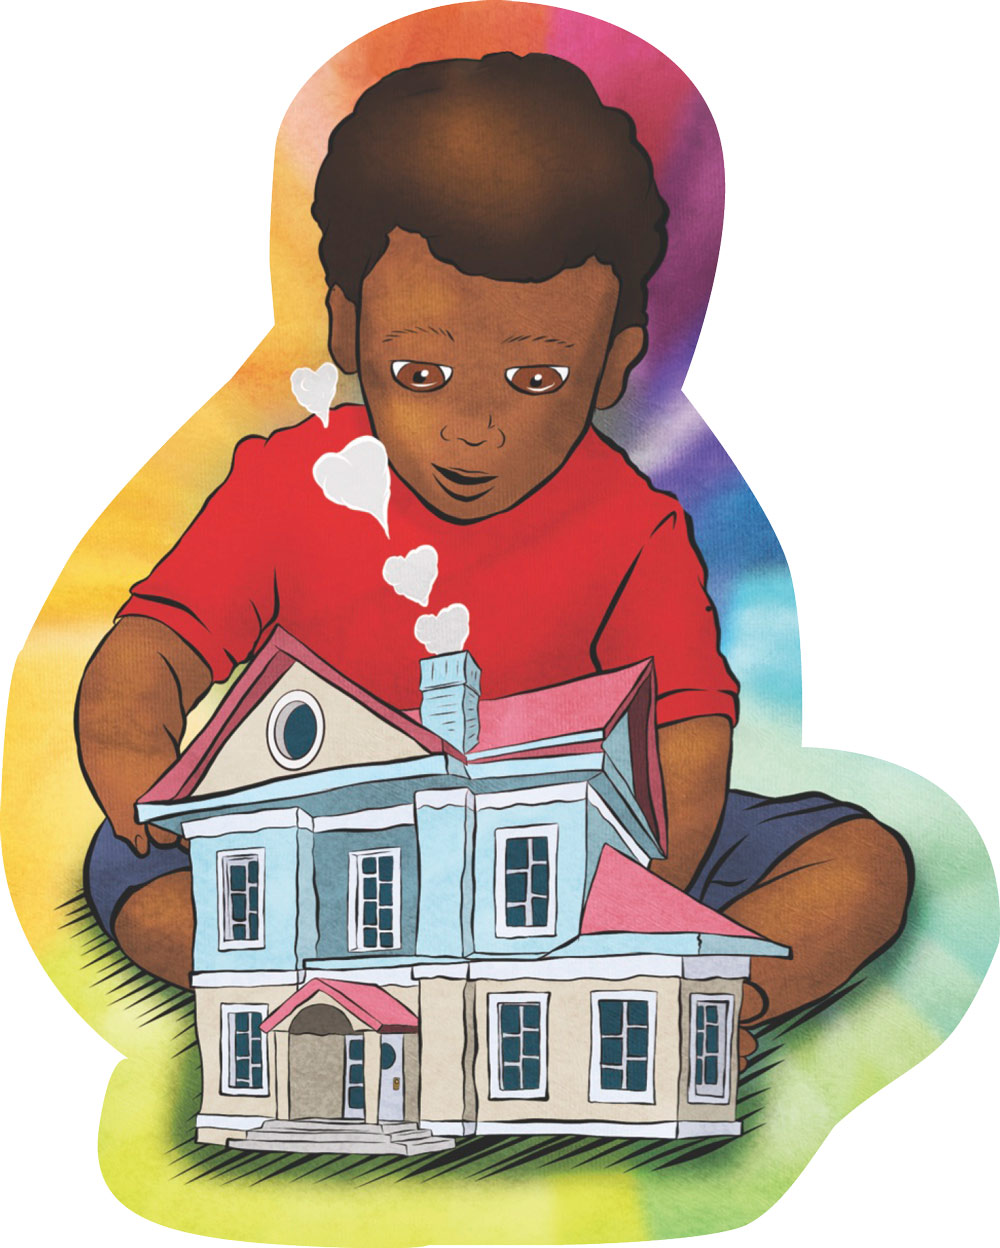 digital illustration of a little boy with a toy house